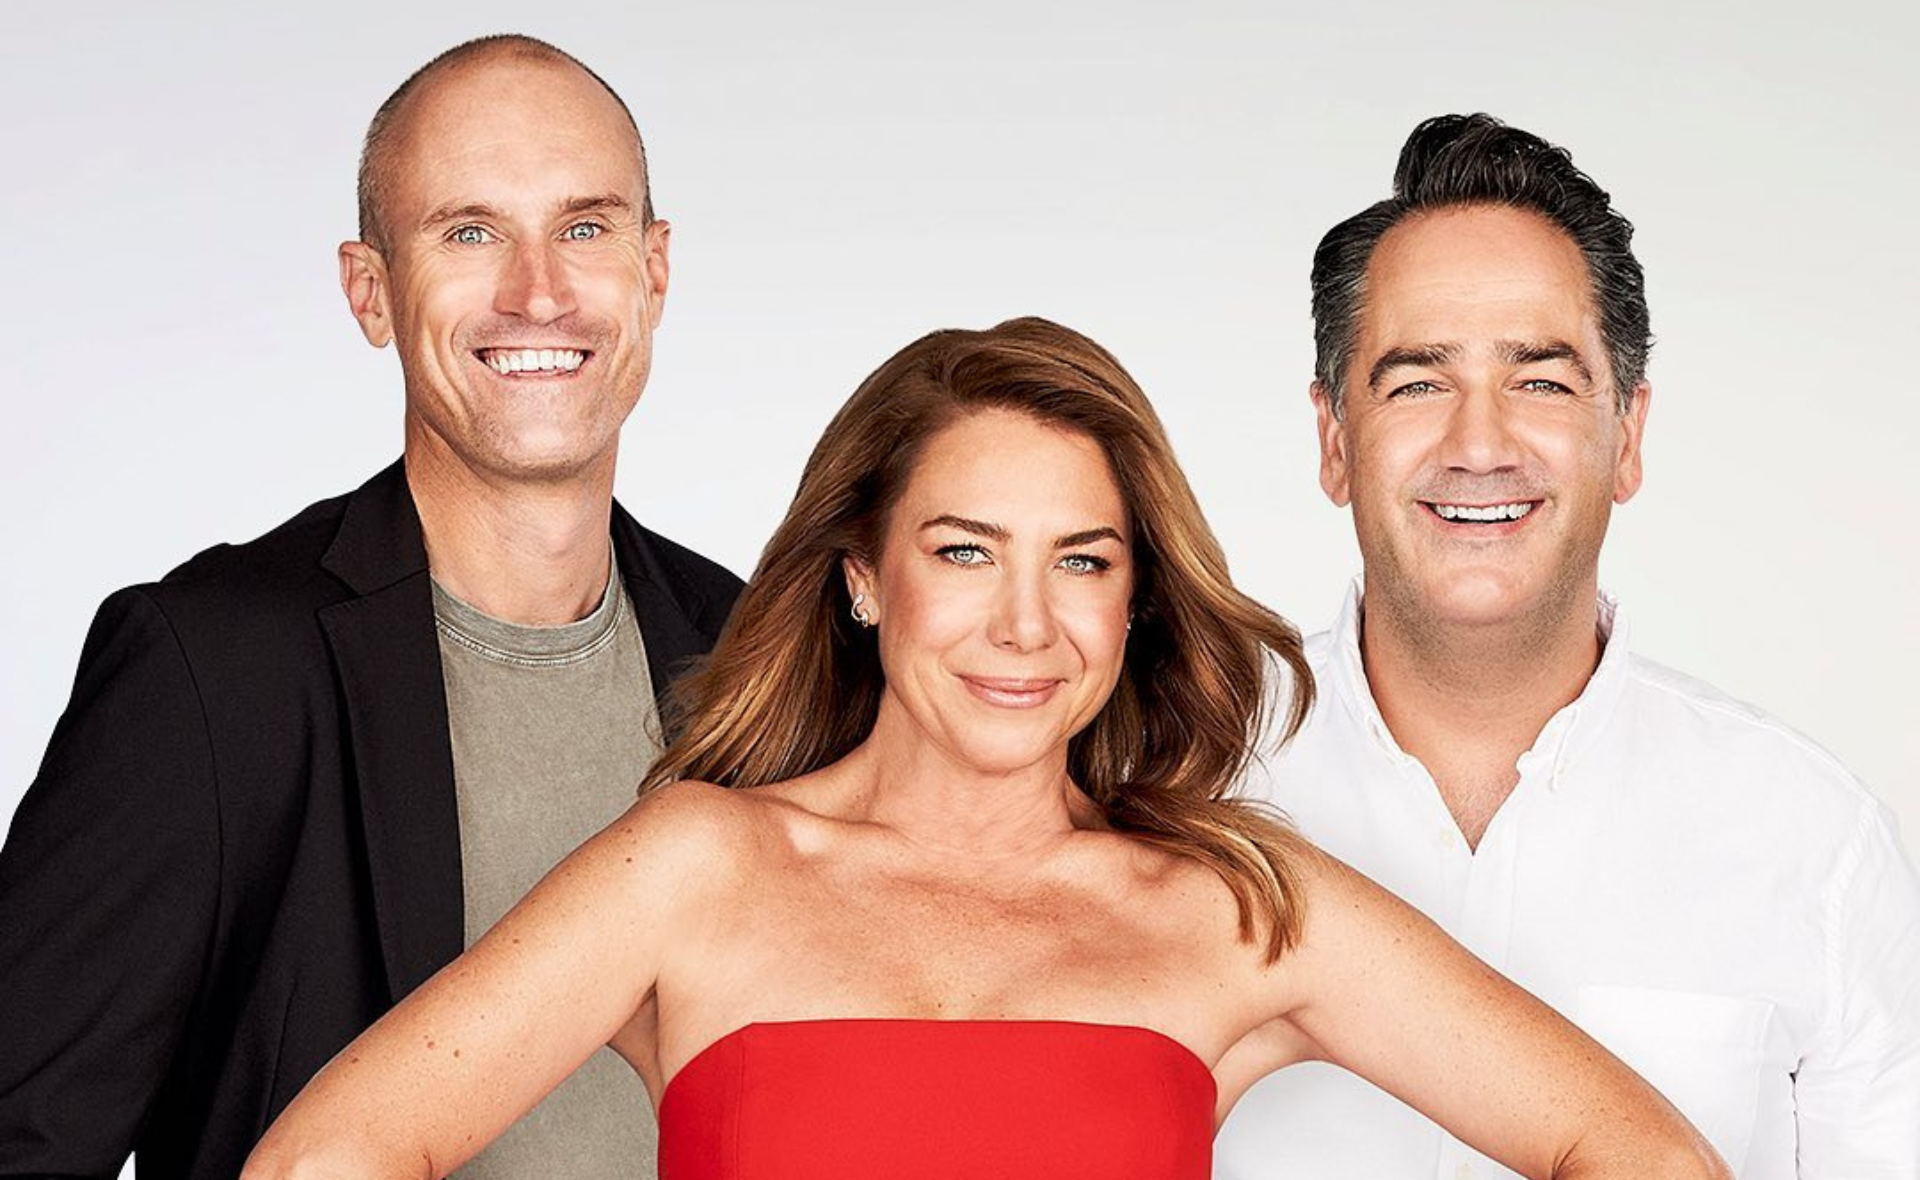 Nova radio in turmoil as Kate Ritchie jumps ship to join unimpressed Fitzy and Wippa